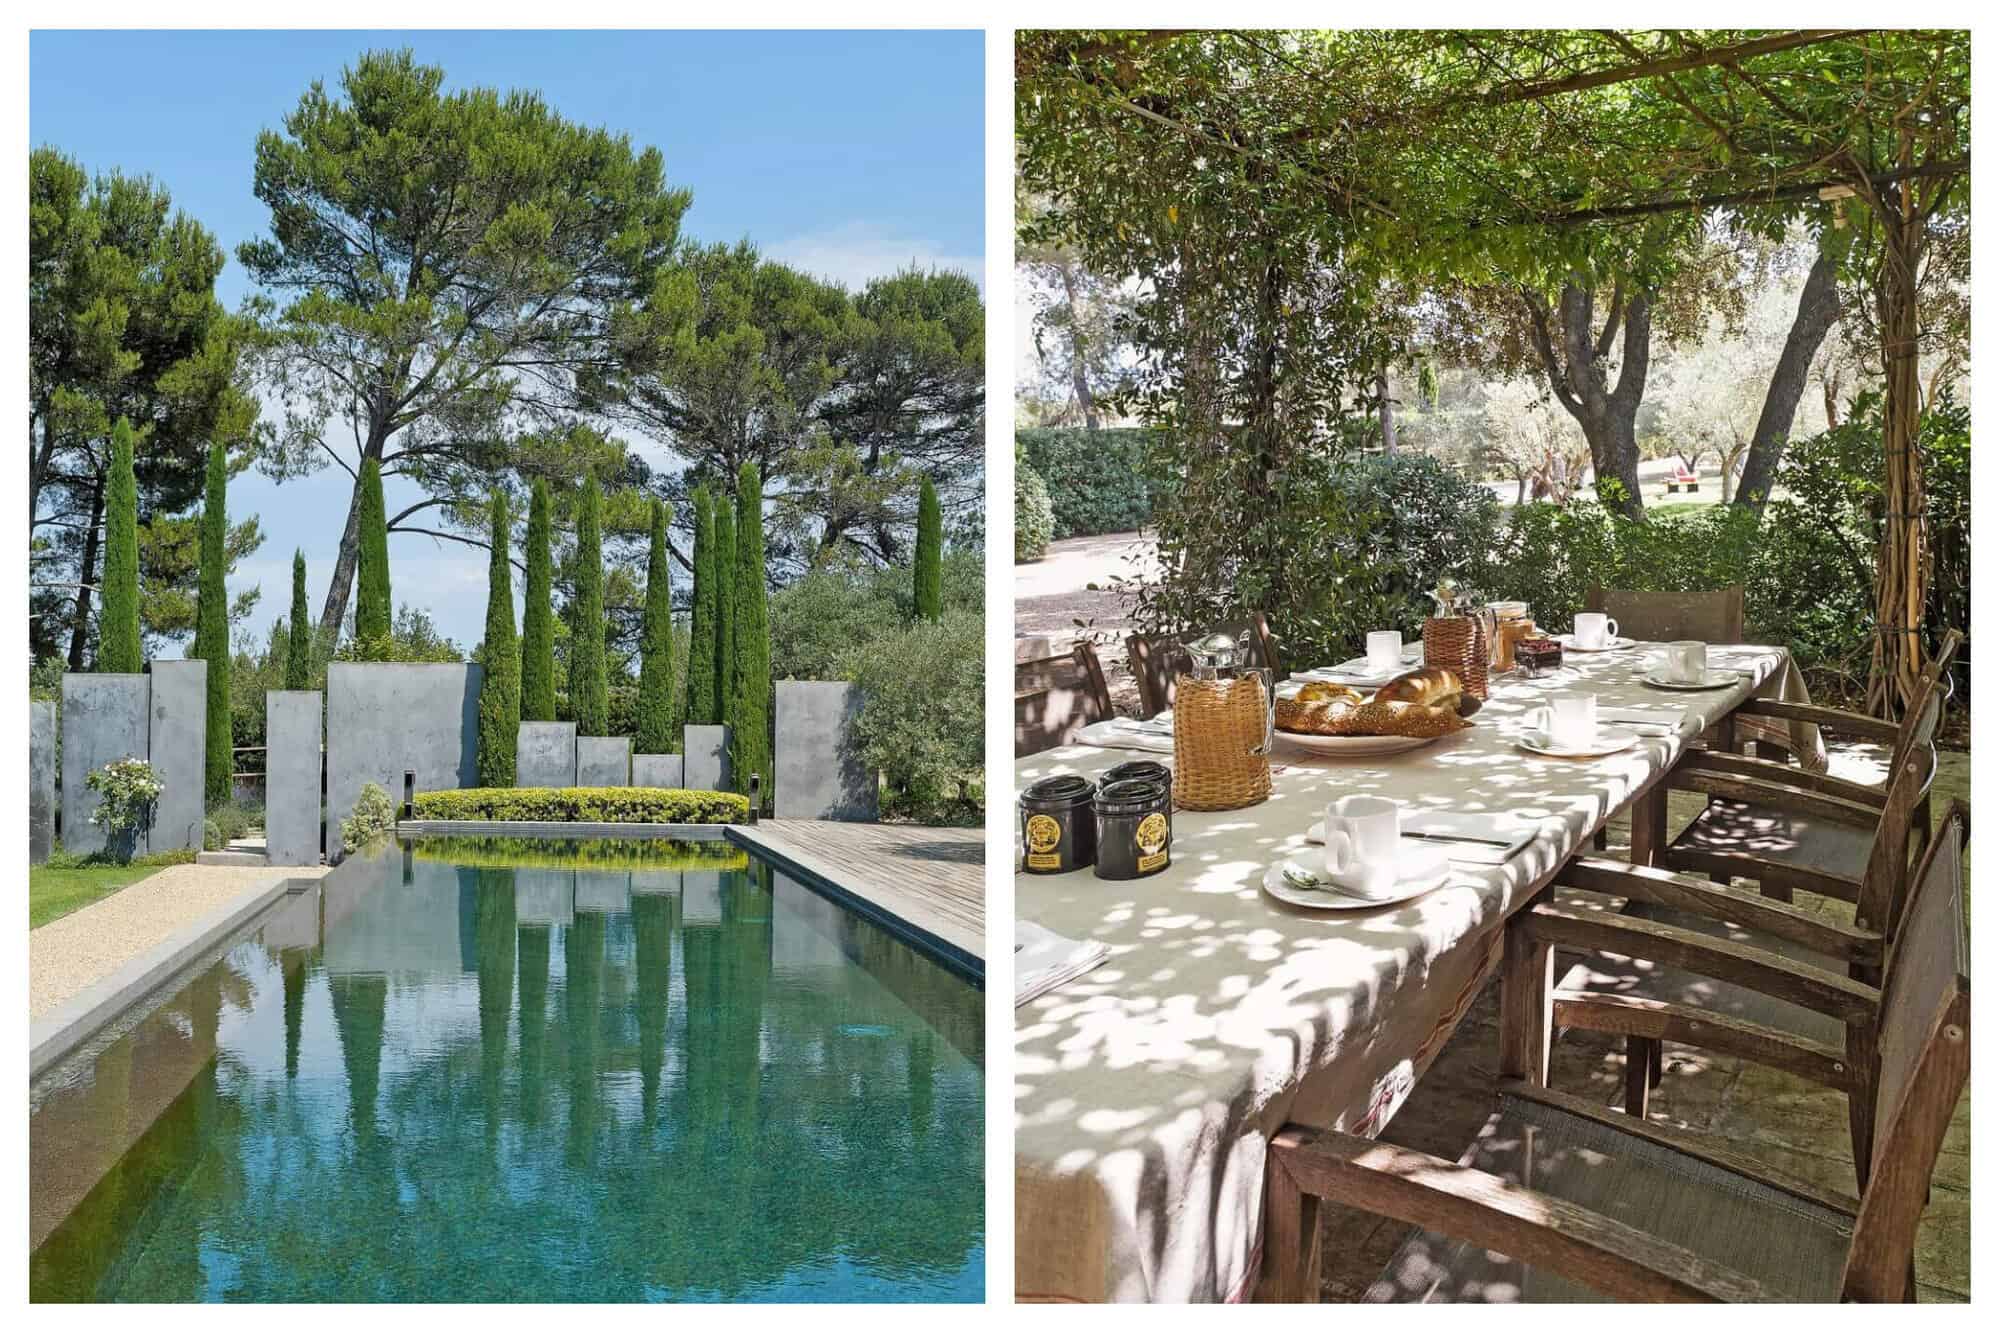 The long blue pool of St Remy Zen reflects the surrounding cypress trees . A shaded terrace has a table set for lunch with baguettes and condiments.